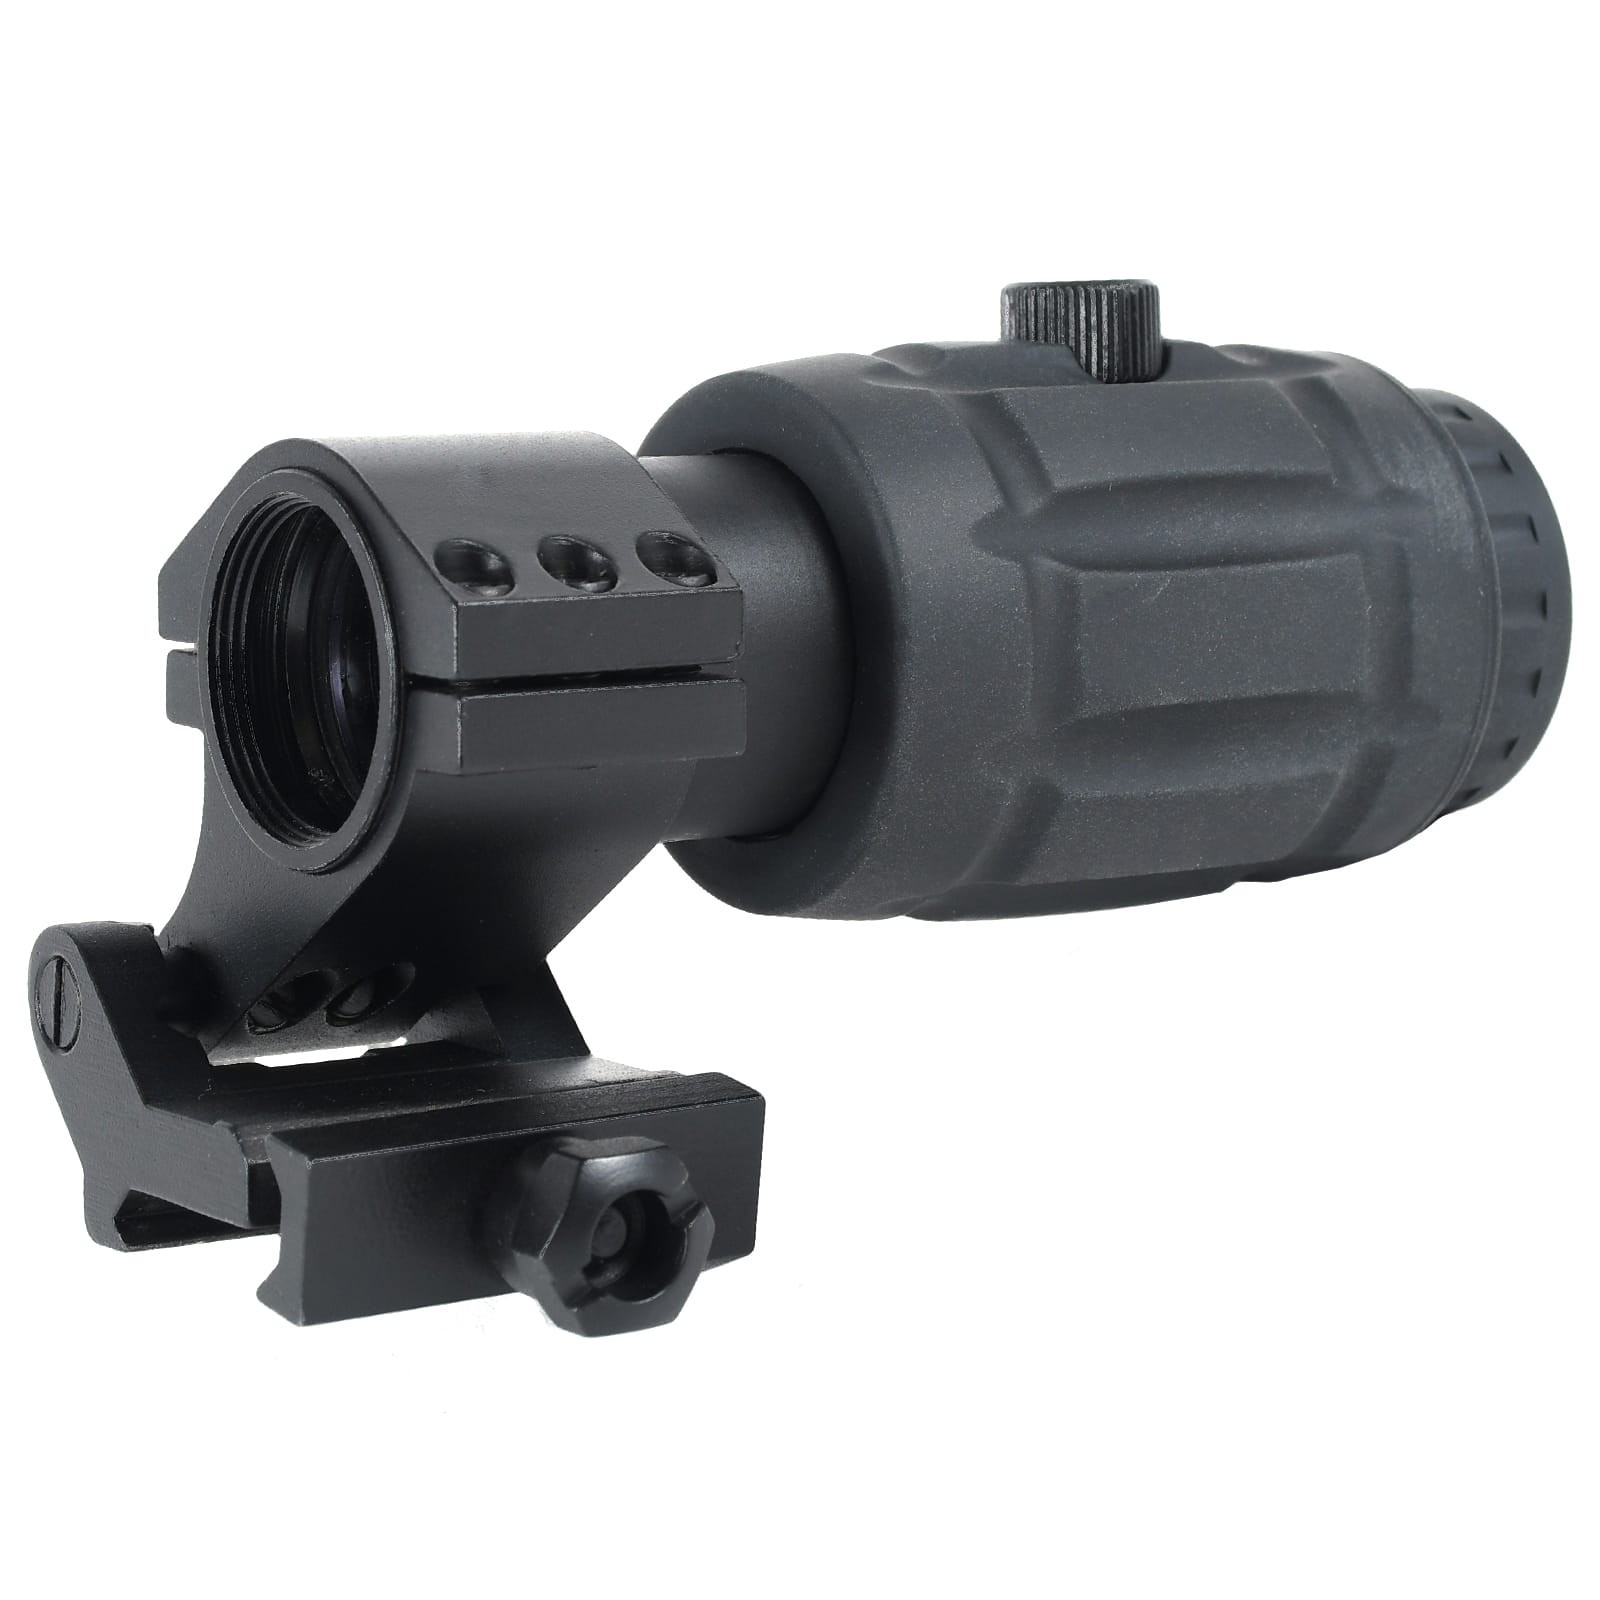 AT3™ RRDM™ 3x Red Dot Magnifier w/ Flip to Side Mount